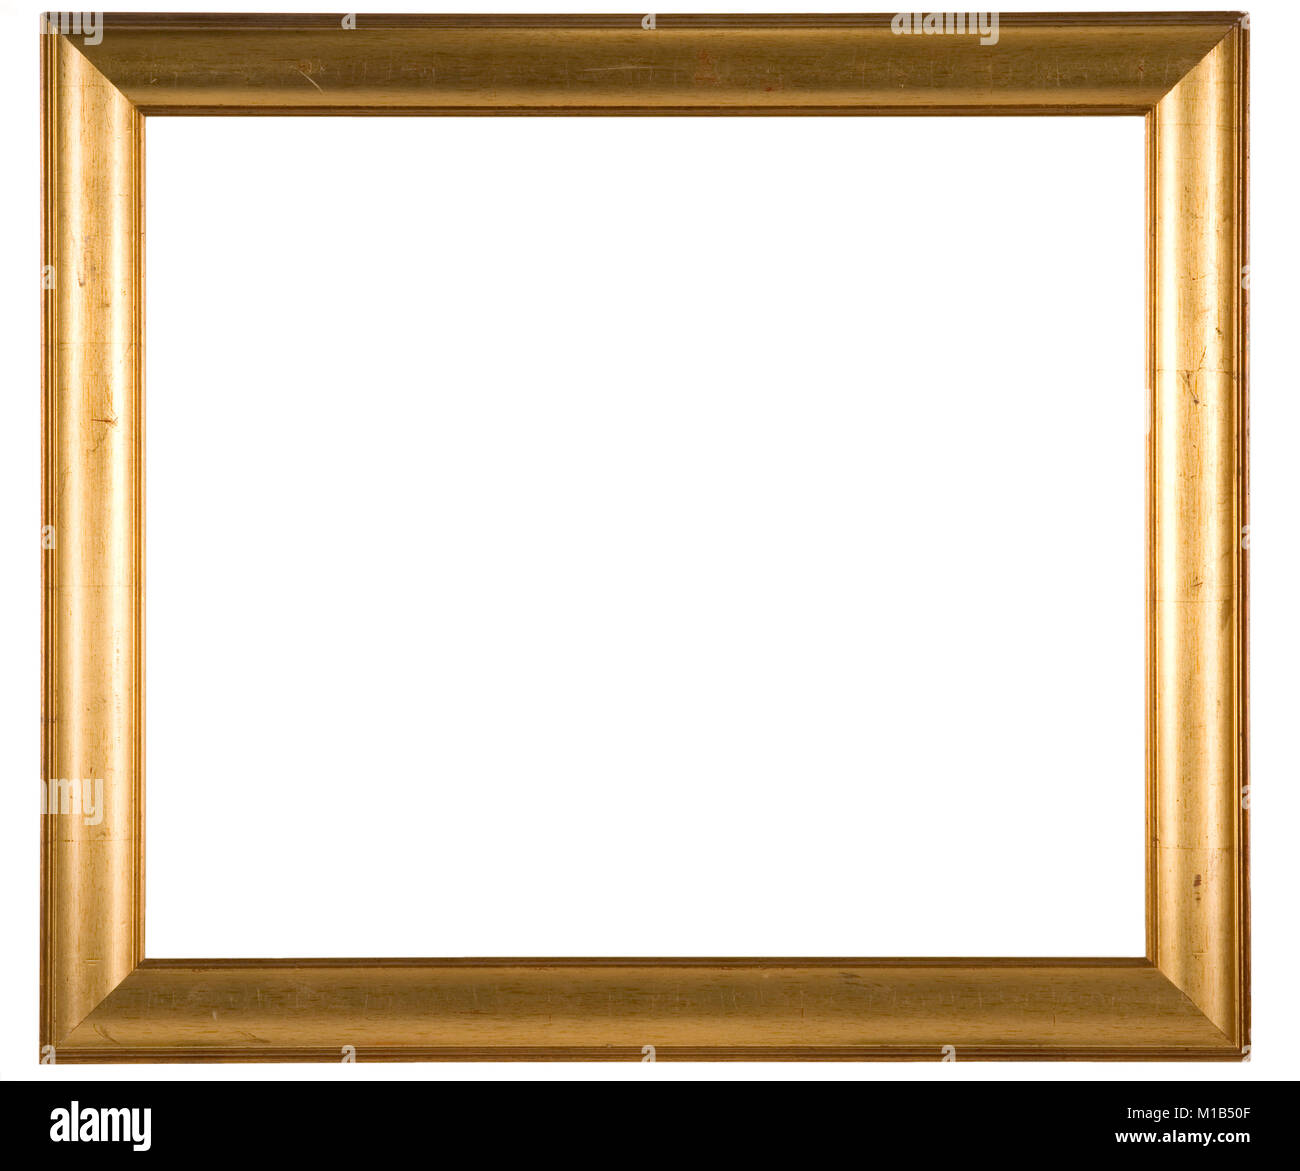 Large empty picture frame, distressed gold finish Stock Photo - Alamy